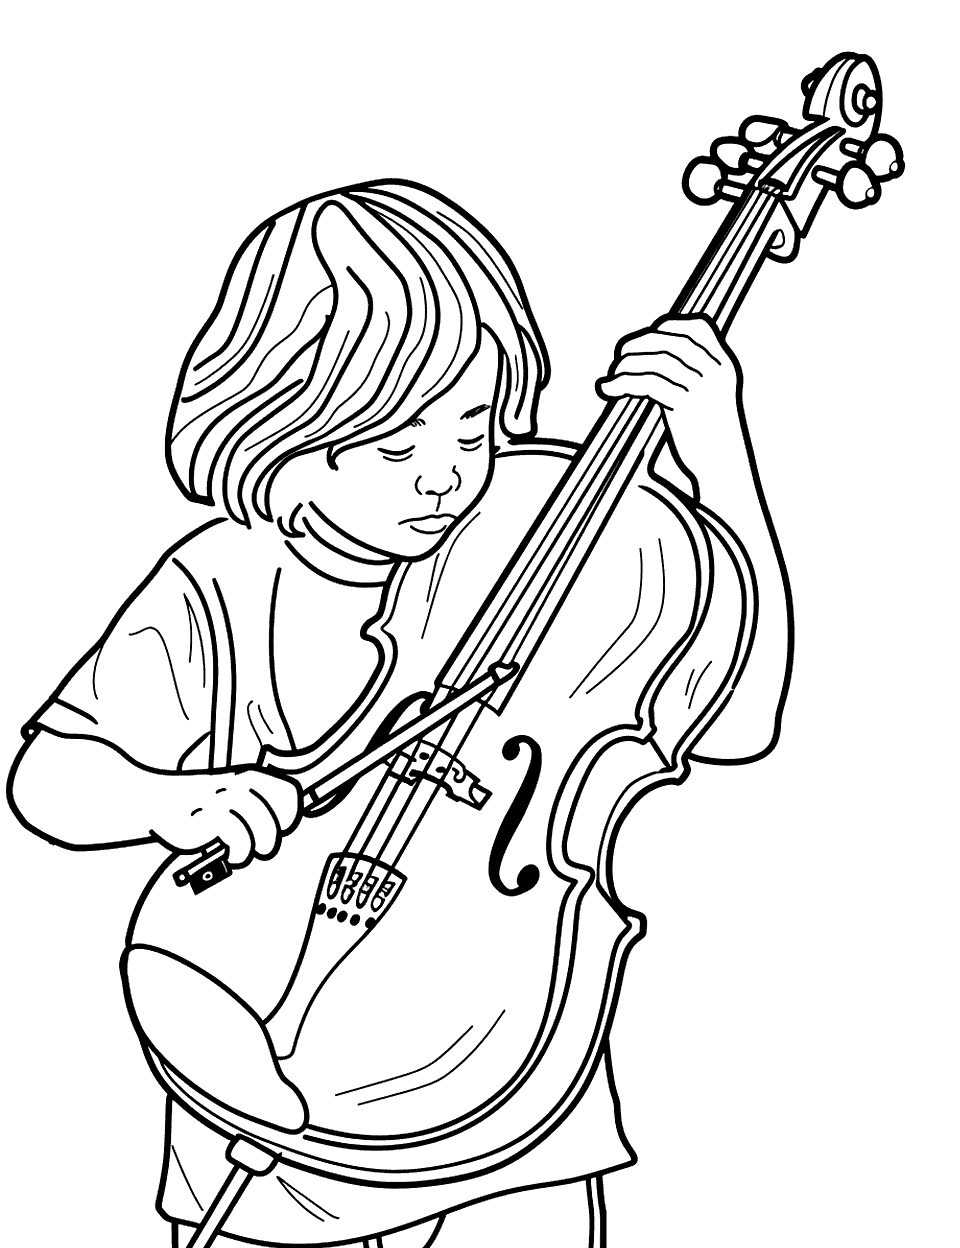 Violin Player in the Orchestra Music Coloring Page - A young child looking focused while playing the violin in a school orchestra.